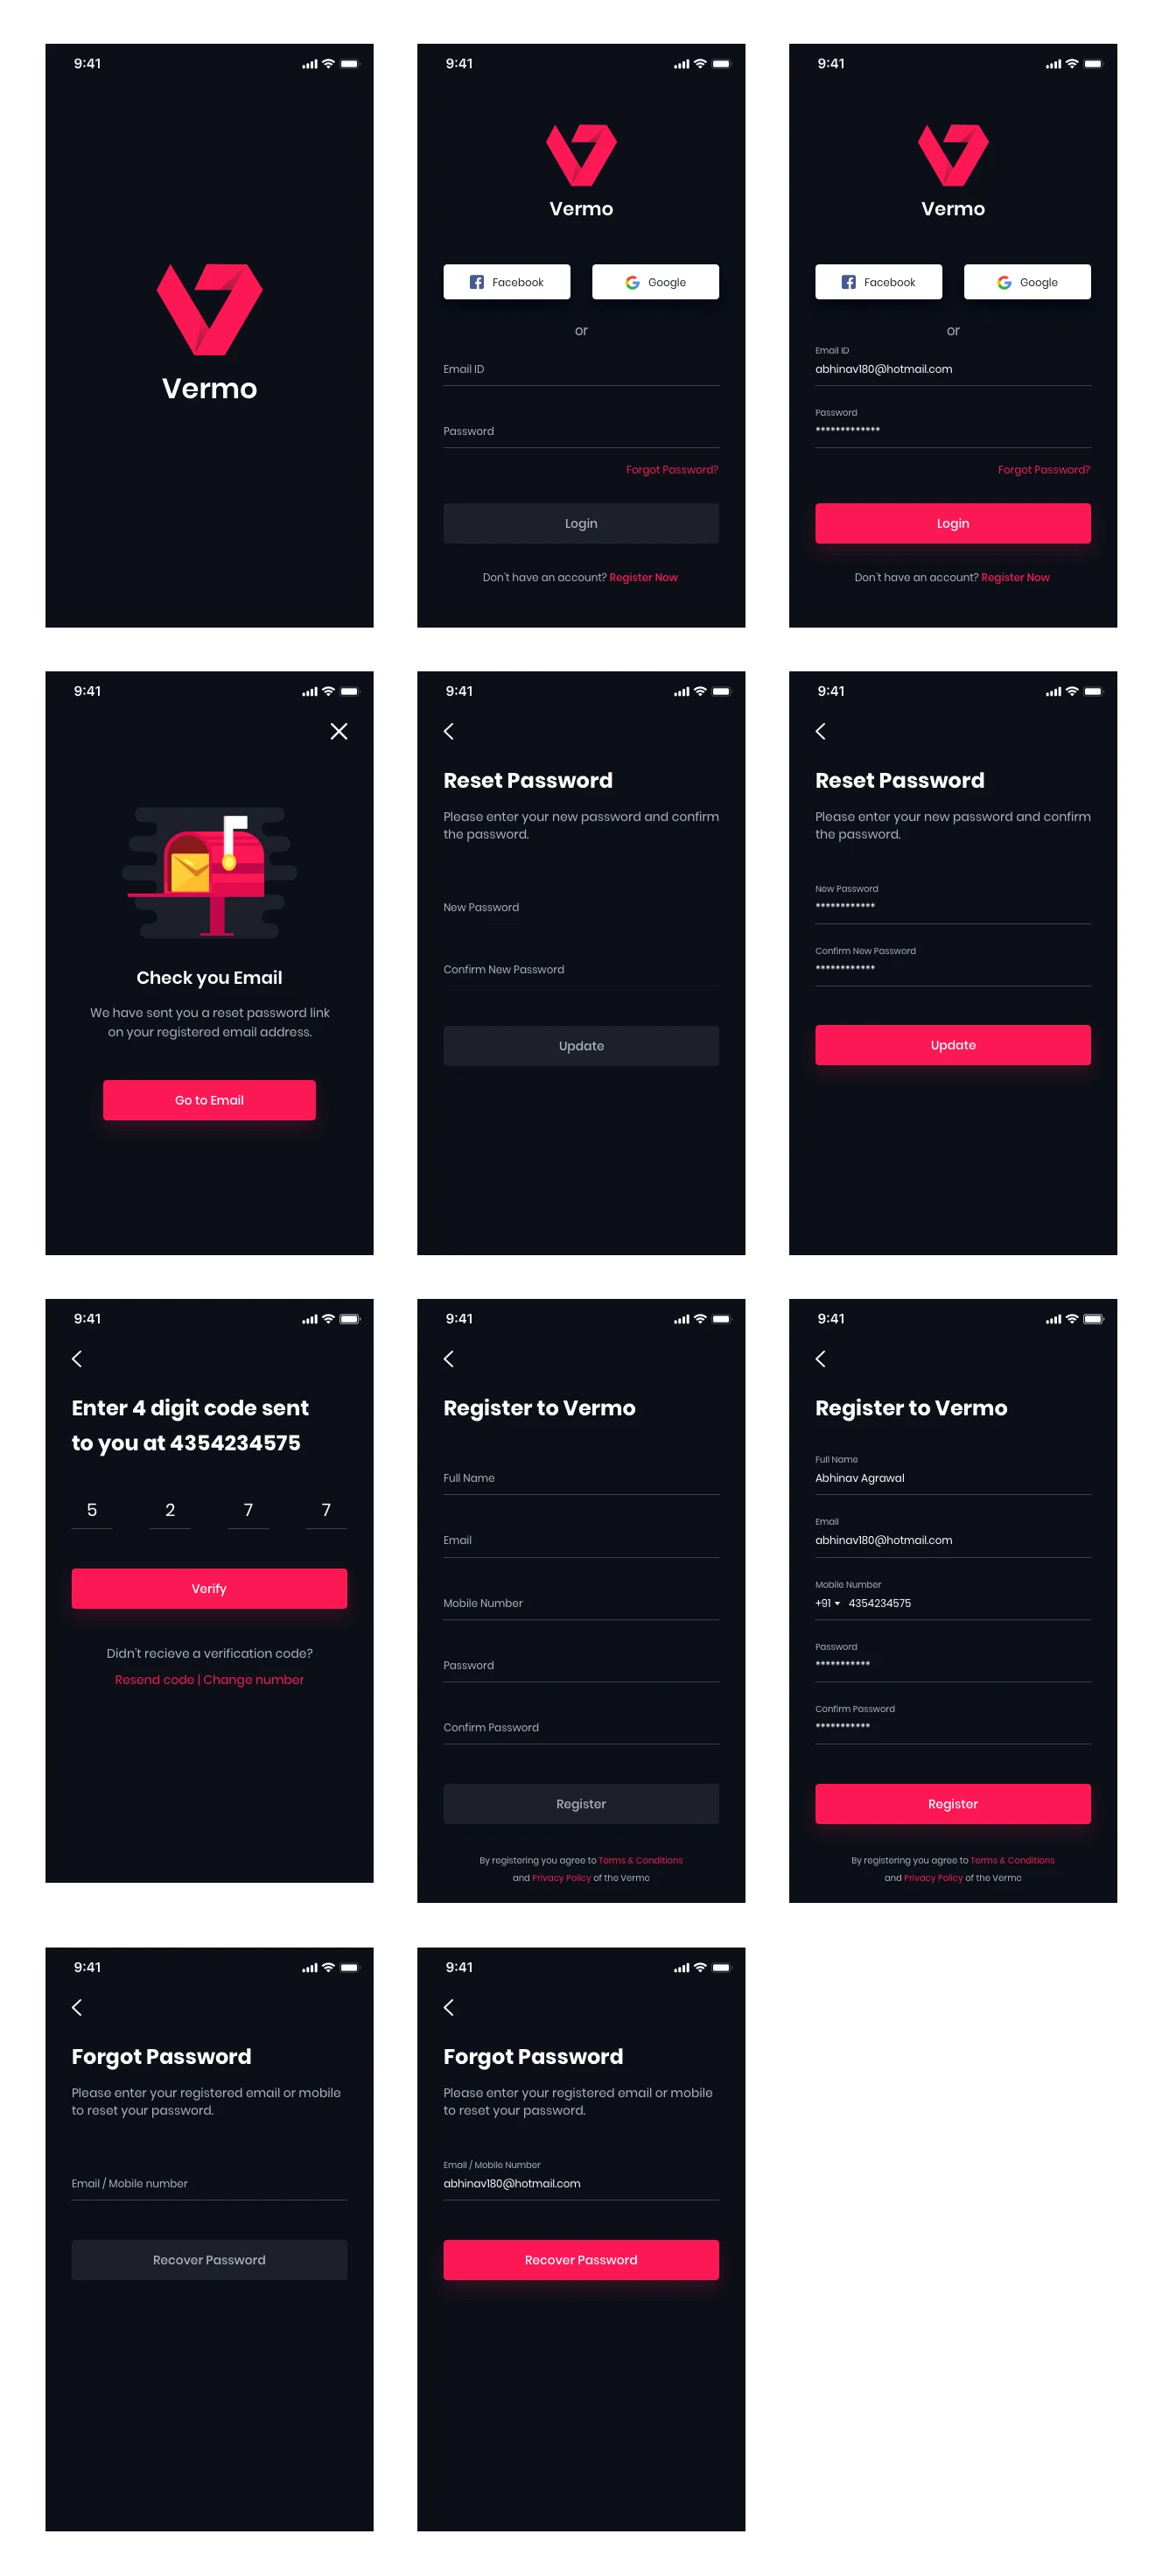 App Login Screens UI Kit - Login Screens UI kit for Sketch to help you quickly design and build login flows. This freebie UI kit is available in both light and dark theme. Includes 20+ screens